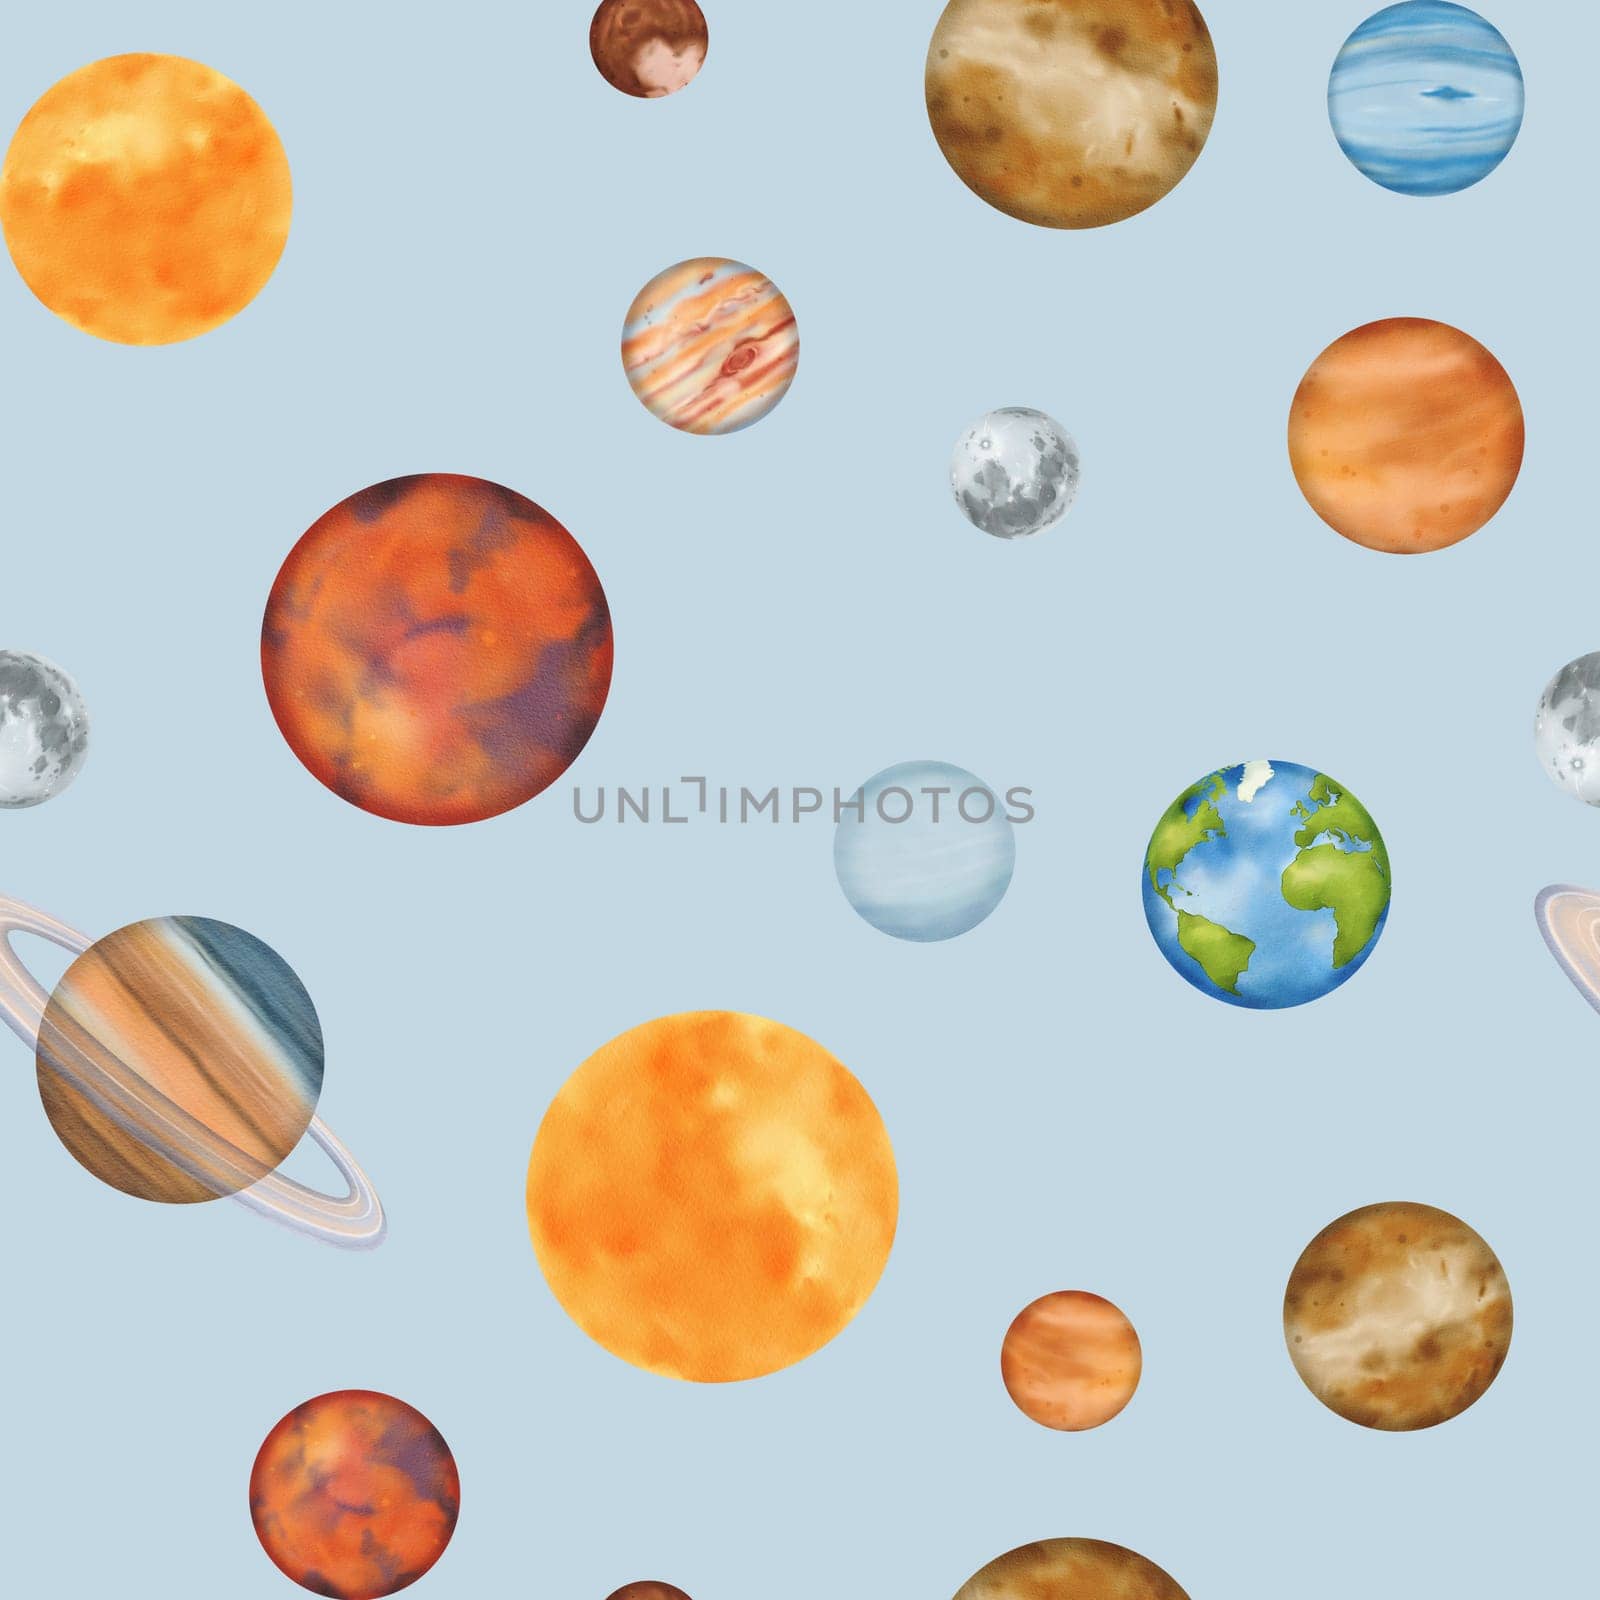 Seamless pattern The solar system. Mercury, Venus, Earth with its satellite, the Moon, Mars, Jupiter, Saturn, Uranus, Neptune, and the dwarf planet Pluto. For astronomy lessons. Watercolor illustration.